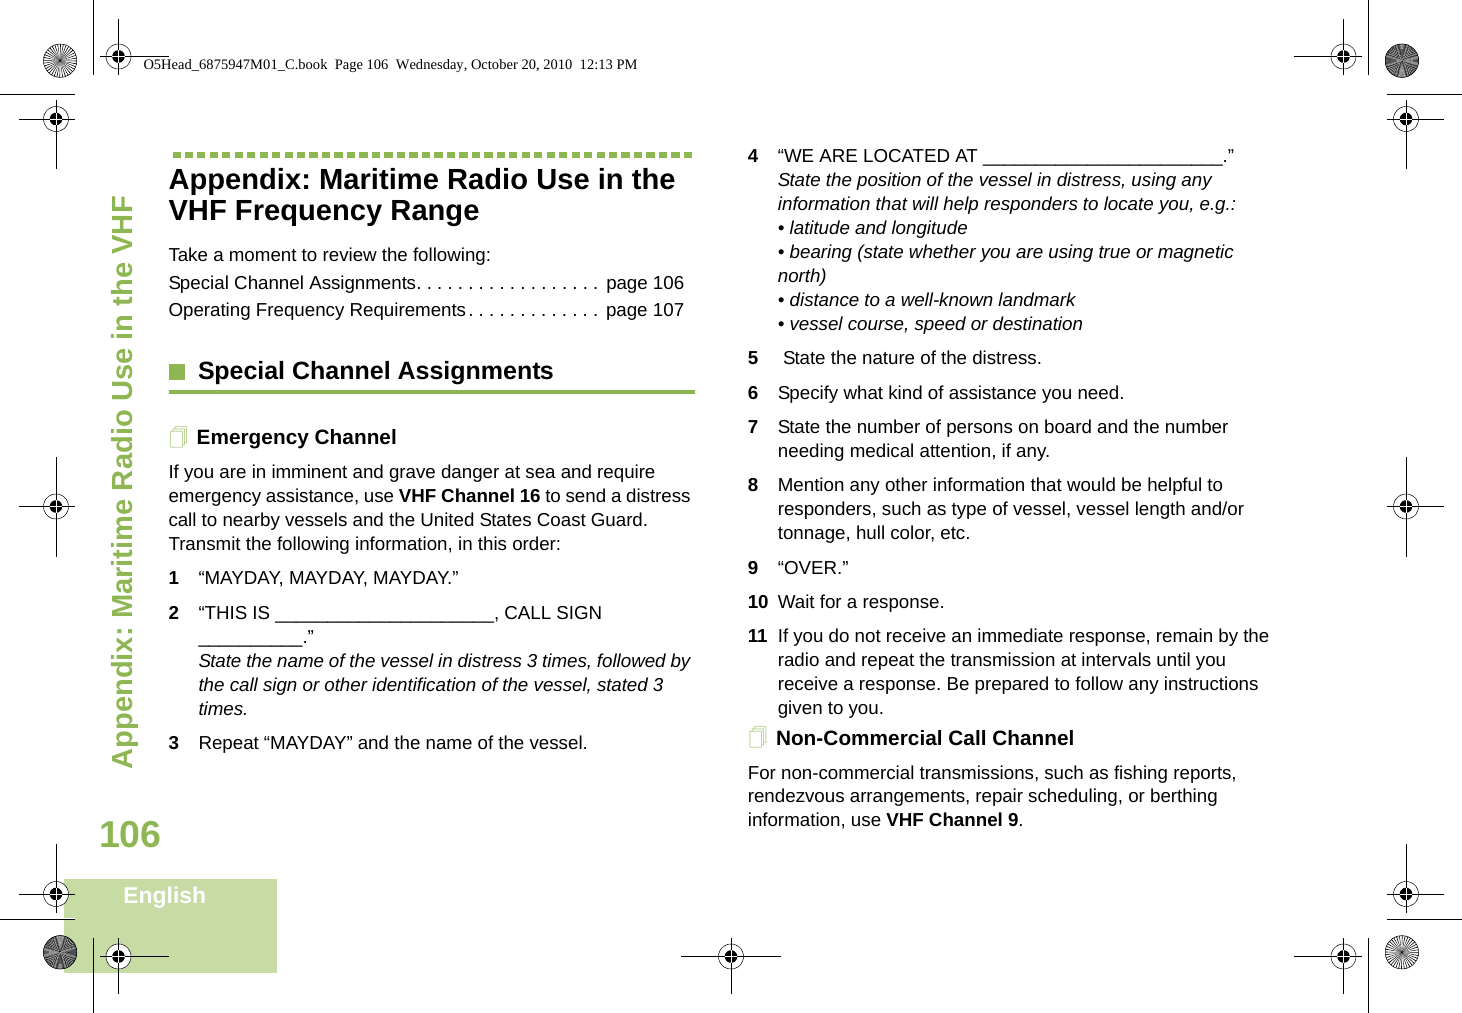 Appendix: Maritime Radio Use in the VHF English106Appendix: Maritime Radio Use in the VHF Frequency RangeTake a moment to review the following:Special Channel Assignments. . . . . . . . . . . . . . . . . . page 106Operating Frequency Requirements. . . . . . . . . . . . . page 107Special Channel AssignmentsEmergency ChannelIf you are in imminent and grave danger at sea and require emergency assistance, use VHF Channel 16 to send a distress call to nearby vessels and the United States Coast Guard. Transmit the following information, in this order:1“MAYDAY, MAYDAY, MAYDAY.”2“THIS IS _____________________, CALL SIGN __________.”State the name of the vessel in distress 3 times, followed by the call sign or other identification of the vessel, stated 3 times.3Repeat “MAYDAY” and the name of the vessel.4“WE ARE LOCATED AT _______________________.” State the position of the vessel in distress, using any information that will help responders to locate you, e.g.:• latitude and longitude• bearing (state whether you are using true or magnetic north)• distance to a well-known landmark • vessel course, speed or destination 5 State the nature of the distress.6Specify what kind of assistance you need. 7State the number of persons on board and the number needing medical attention, if any. 8Mention any other information that would be helpful to responders, such as type of vessel, vessel length and/or tonnage, hull color, etc.9“OVER.” 10 Wait for a response. 11 If you do not receive an immediate response, remain by the radio and repeat the transmission at intervals until you receive a response. Be prepared to follow any instructions given to you.Non-Commercial Call ChannelFor non-commercial transmissions, such as fishing reports, rendezvous arrangements, repair scheduling, or berthing information, use VHF Channel 9.O5Head_6875947M01_C.book  Page 106  Wednesday, October 20, 2010  12:13 PM